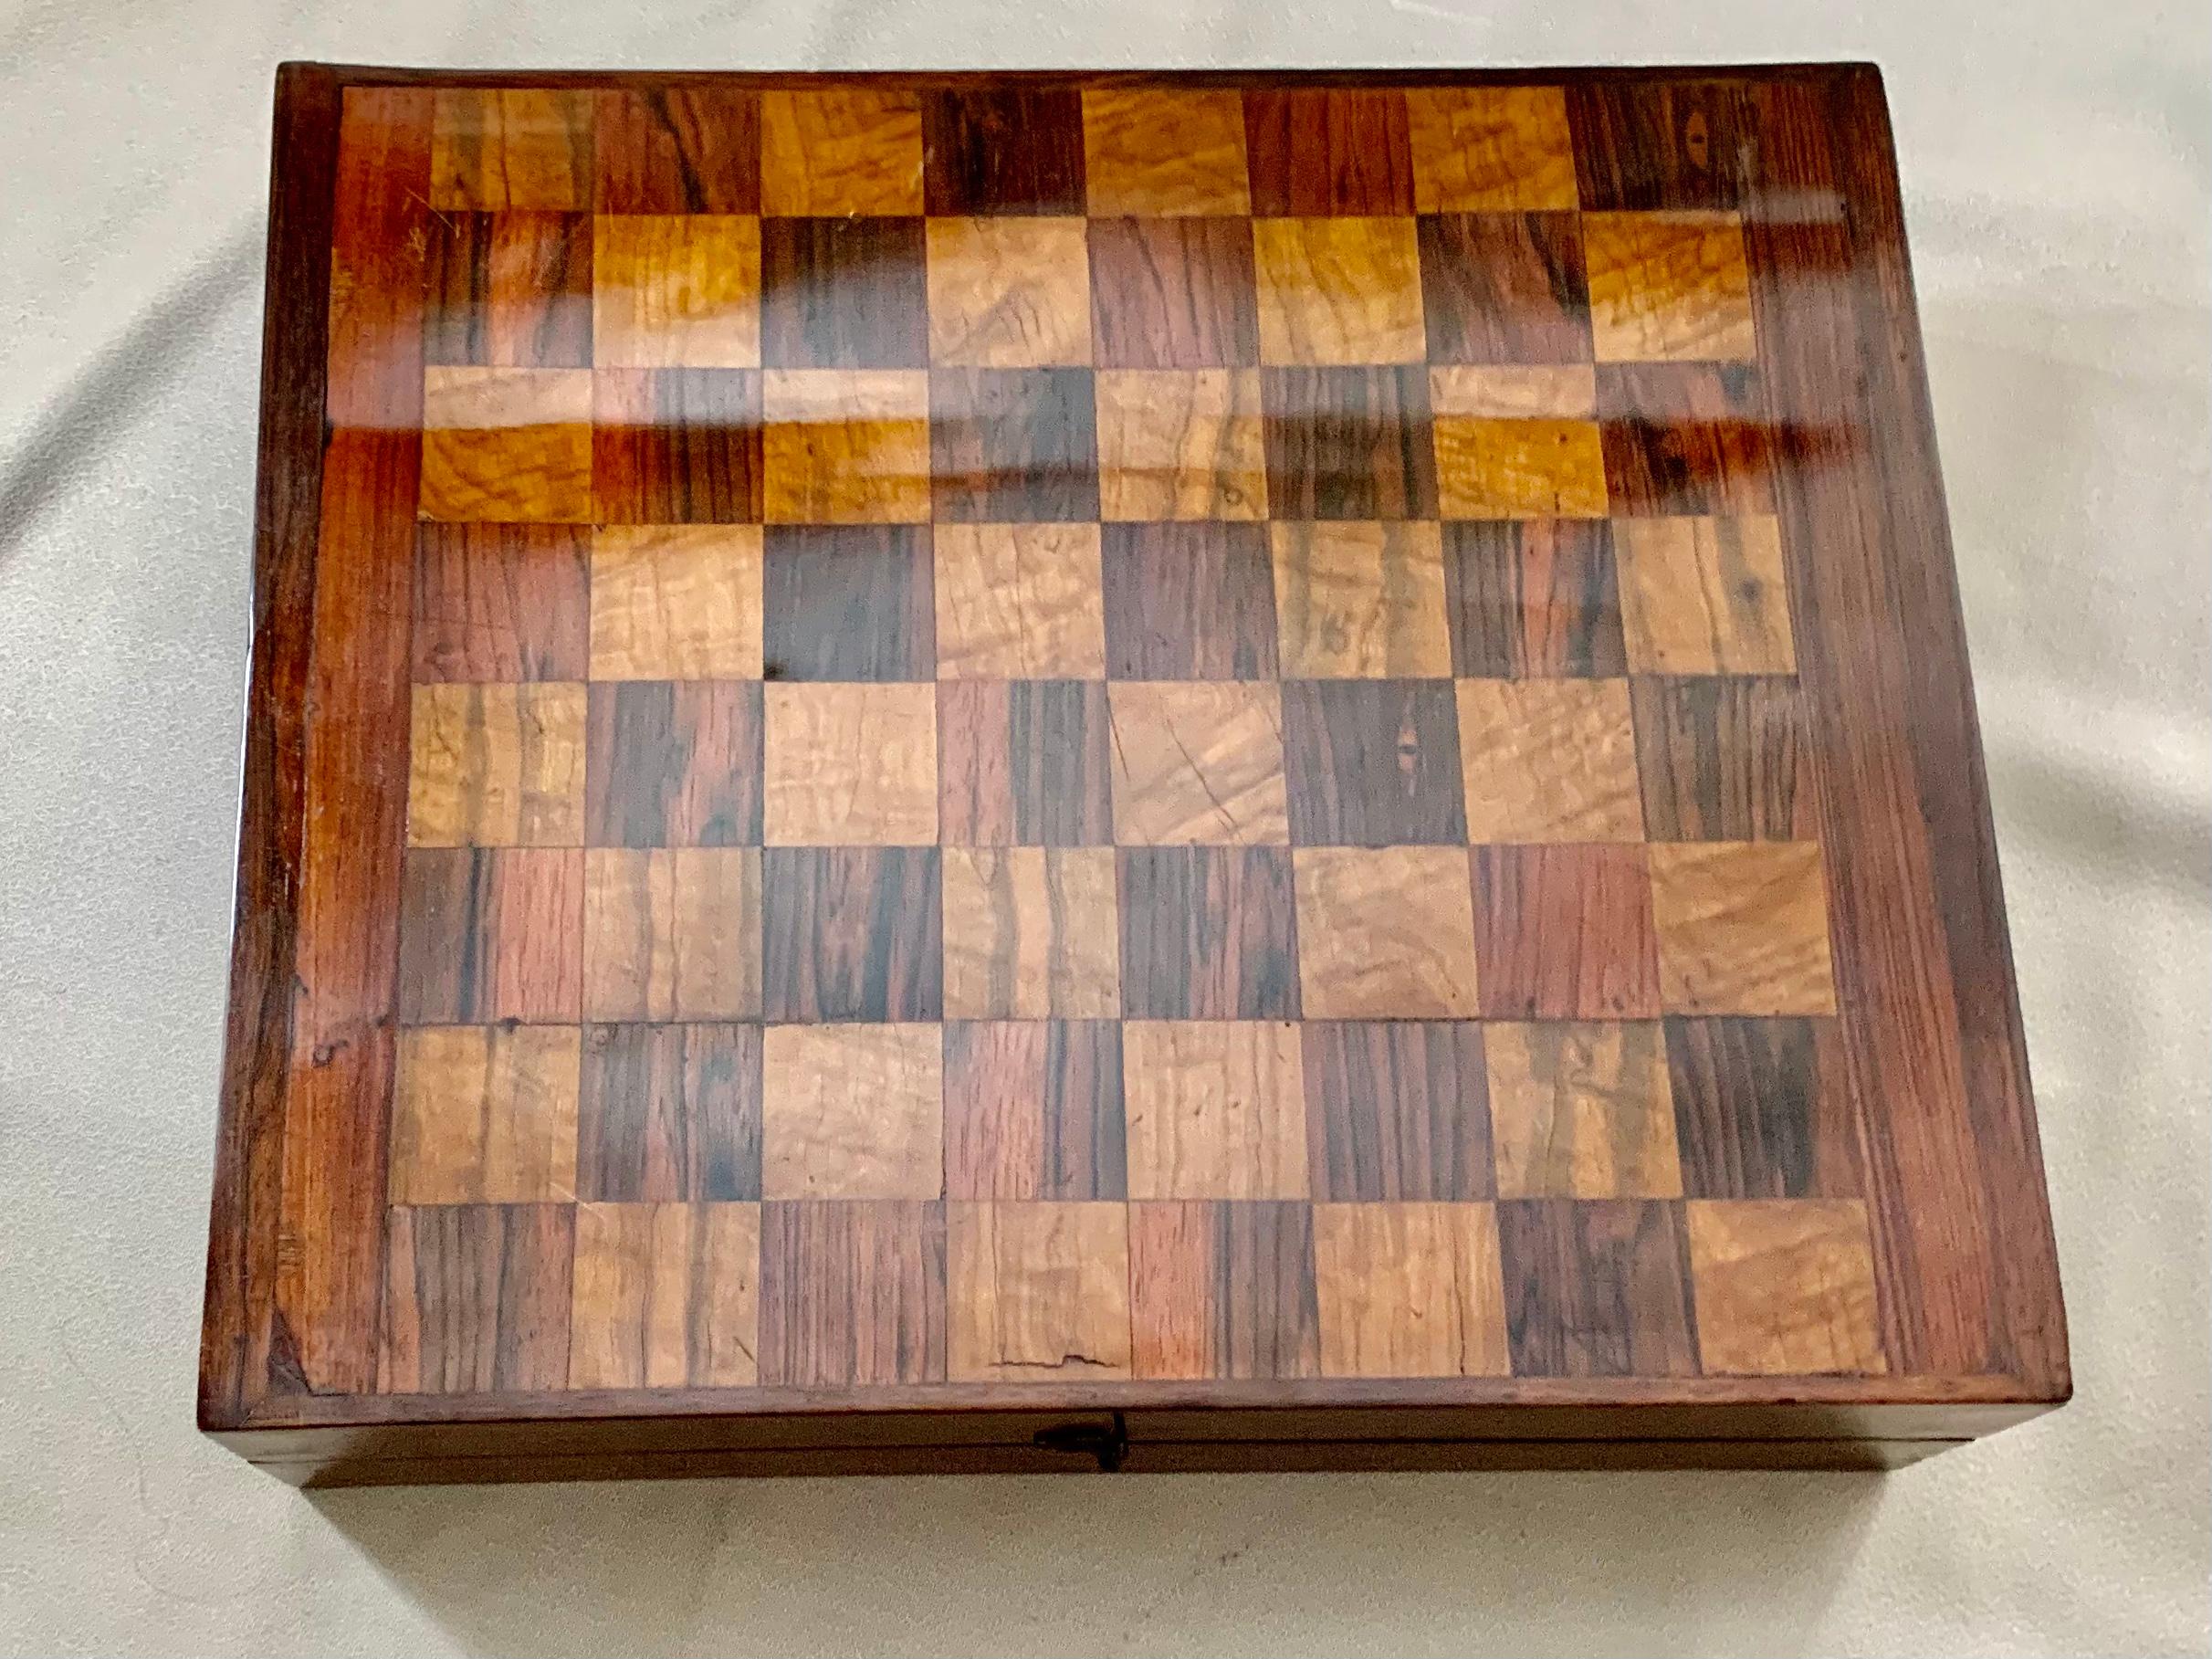 Baroque Large 17th Century Rosewood and Walnut Game Box for Chess, Backgammon, Checkers